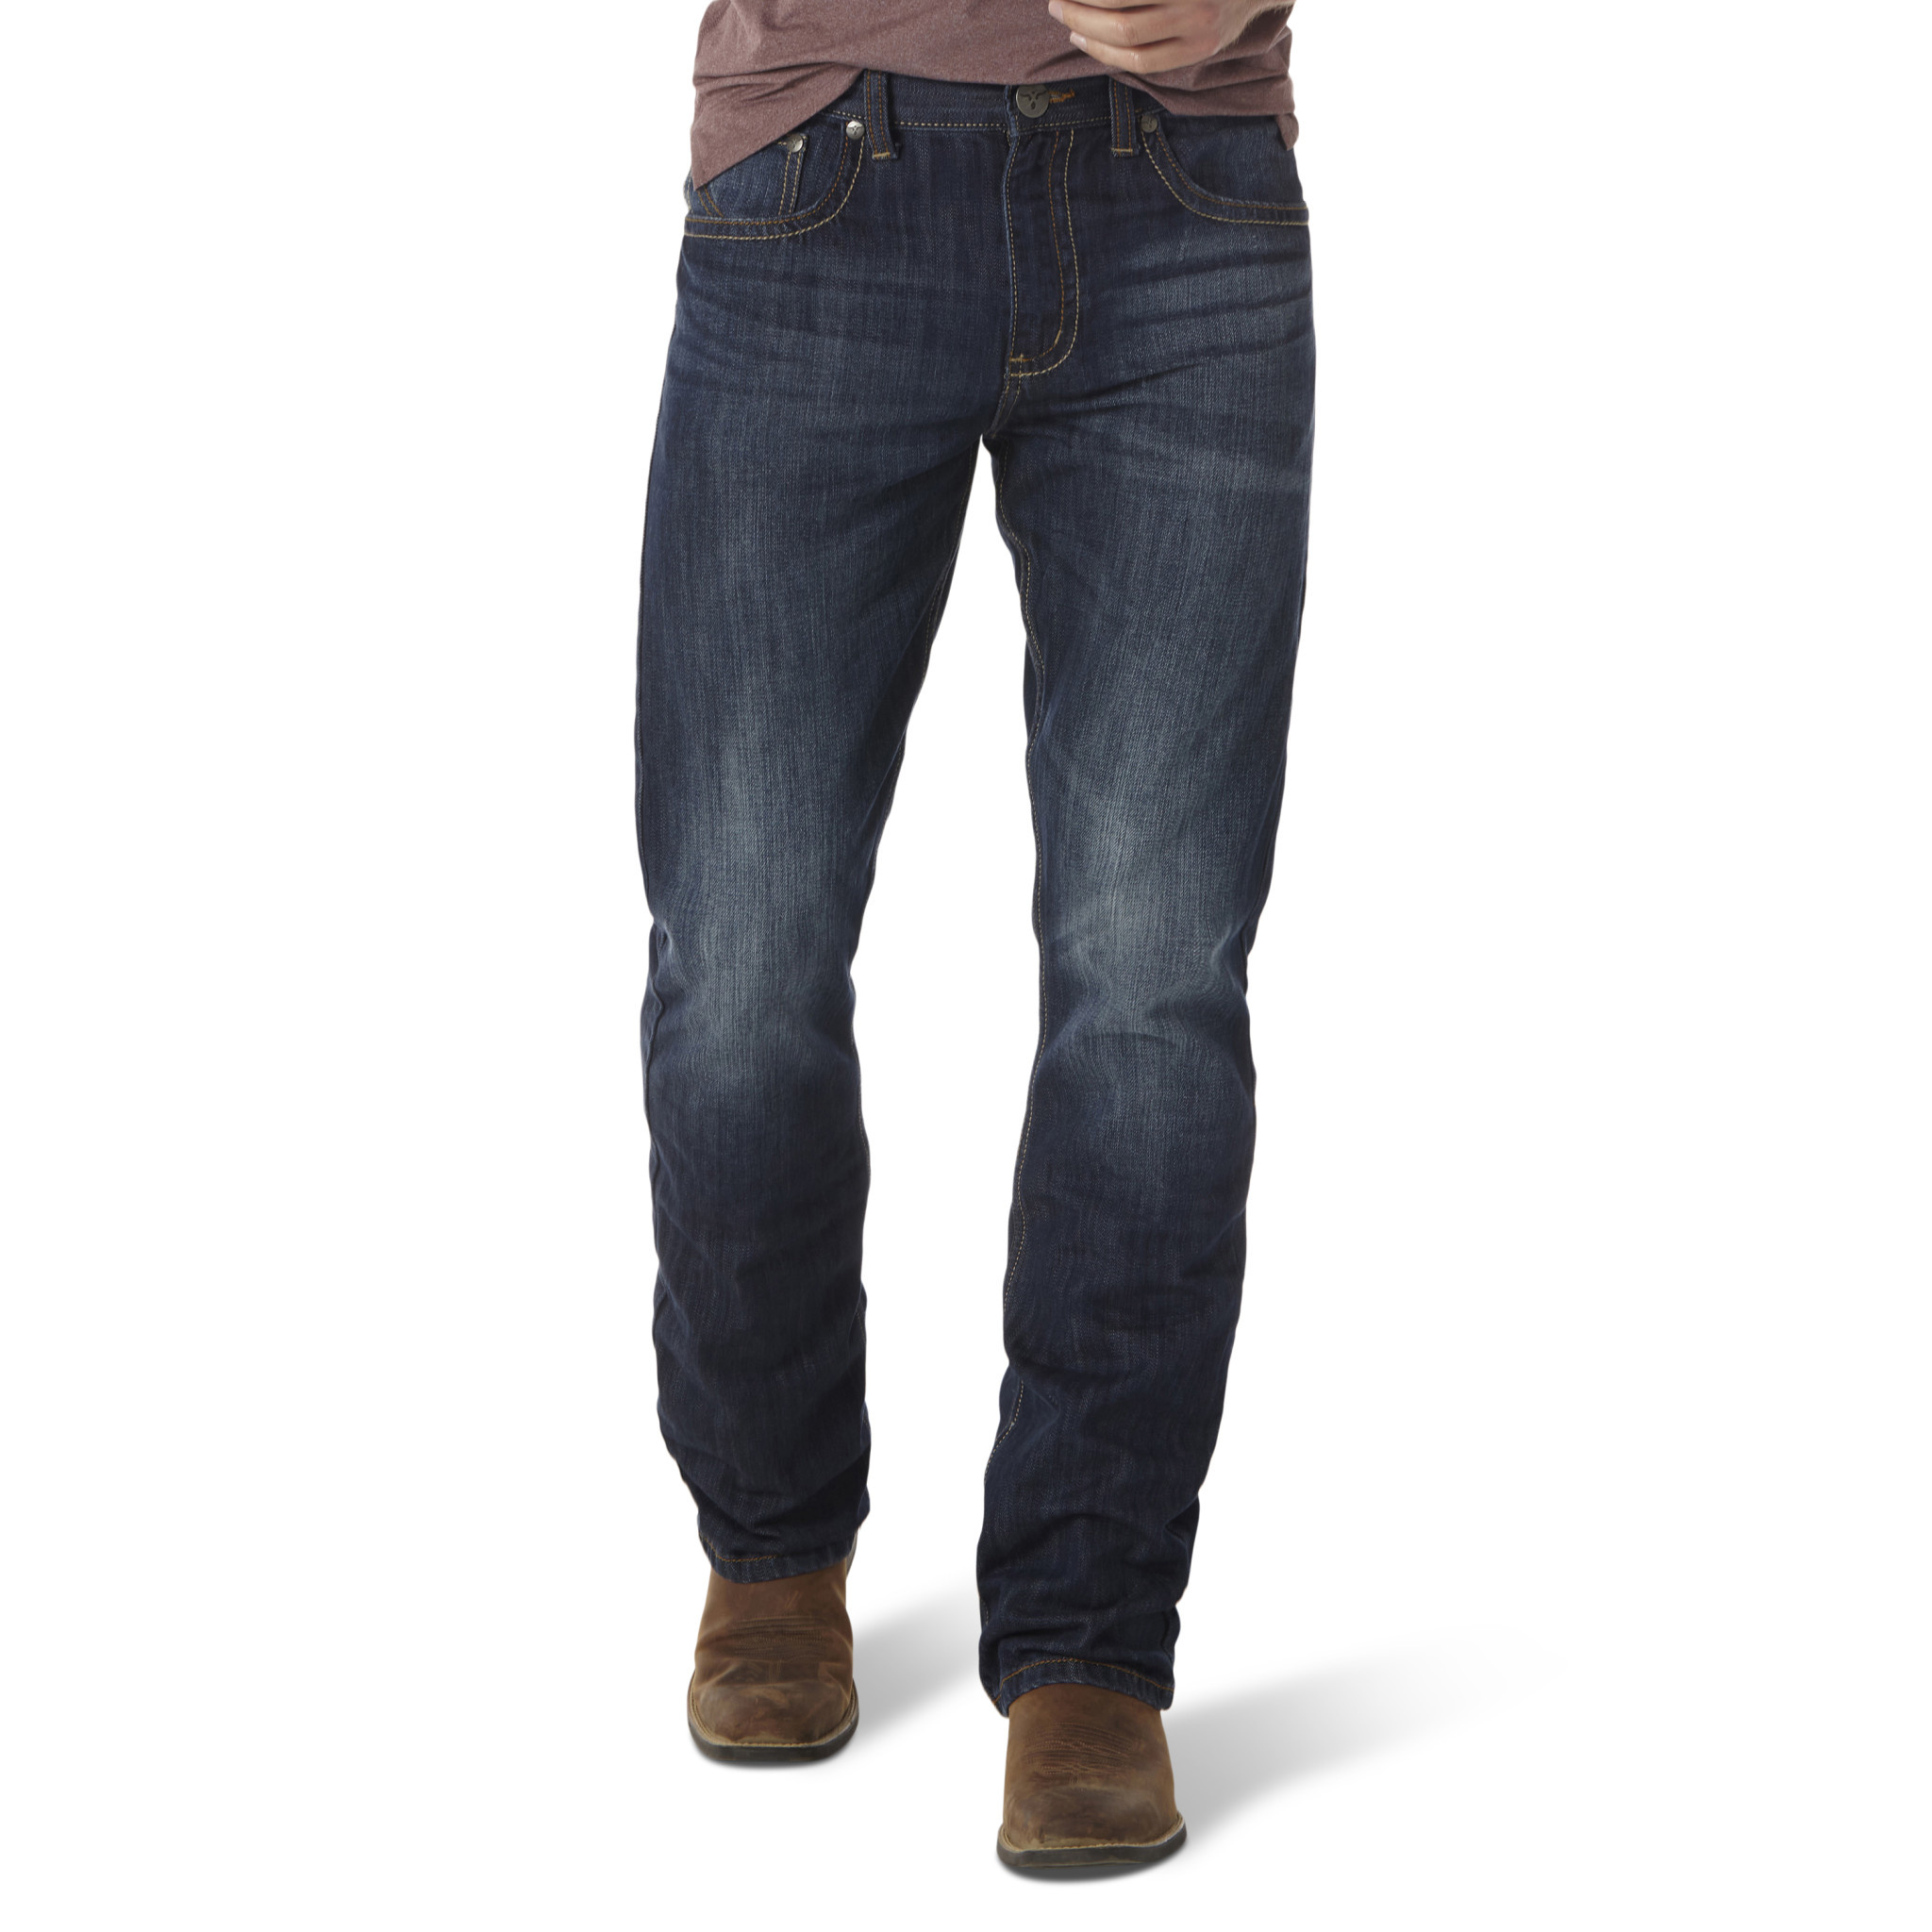 Yee Haw! Here Are the 10 Best Bootcut Jeans for Cowboy Boots